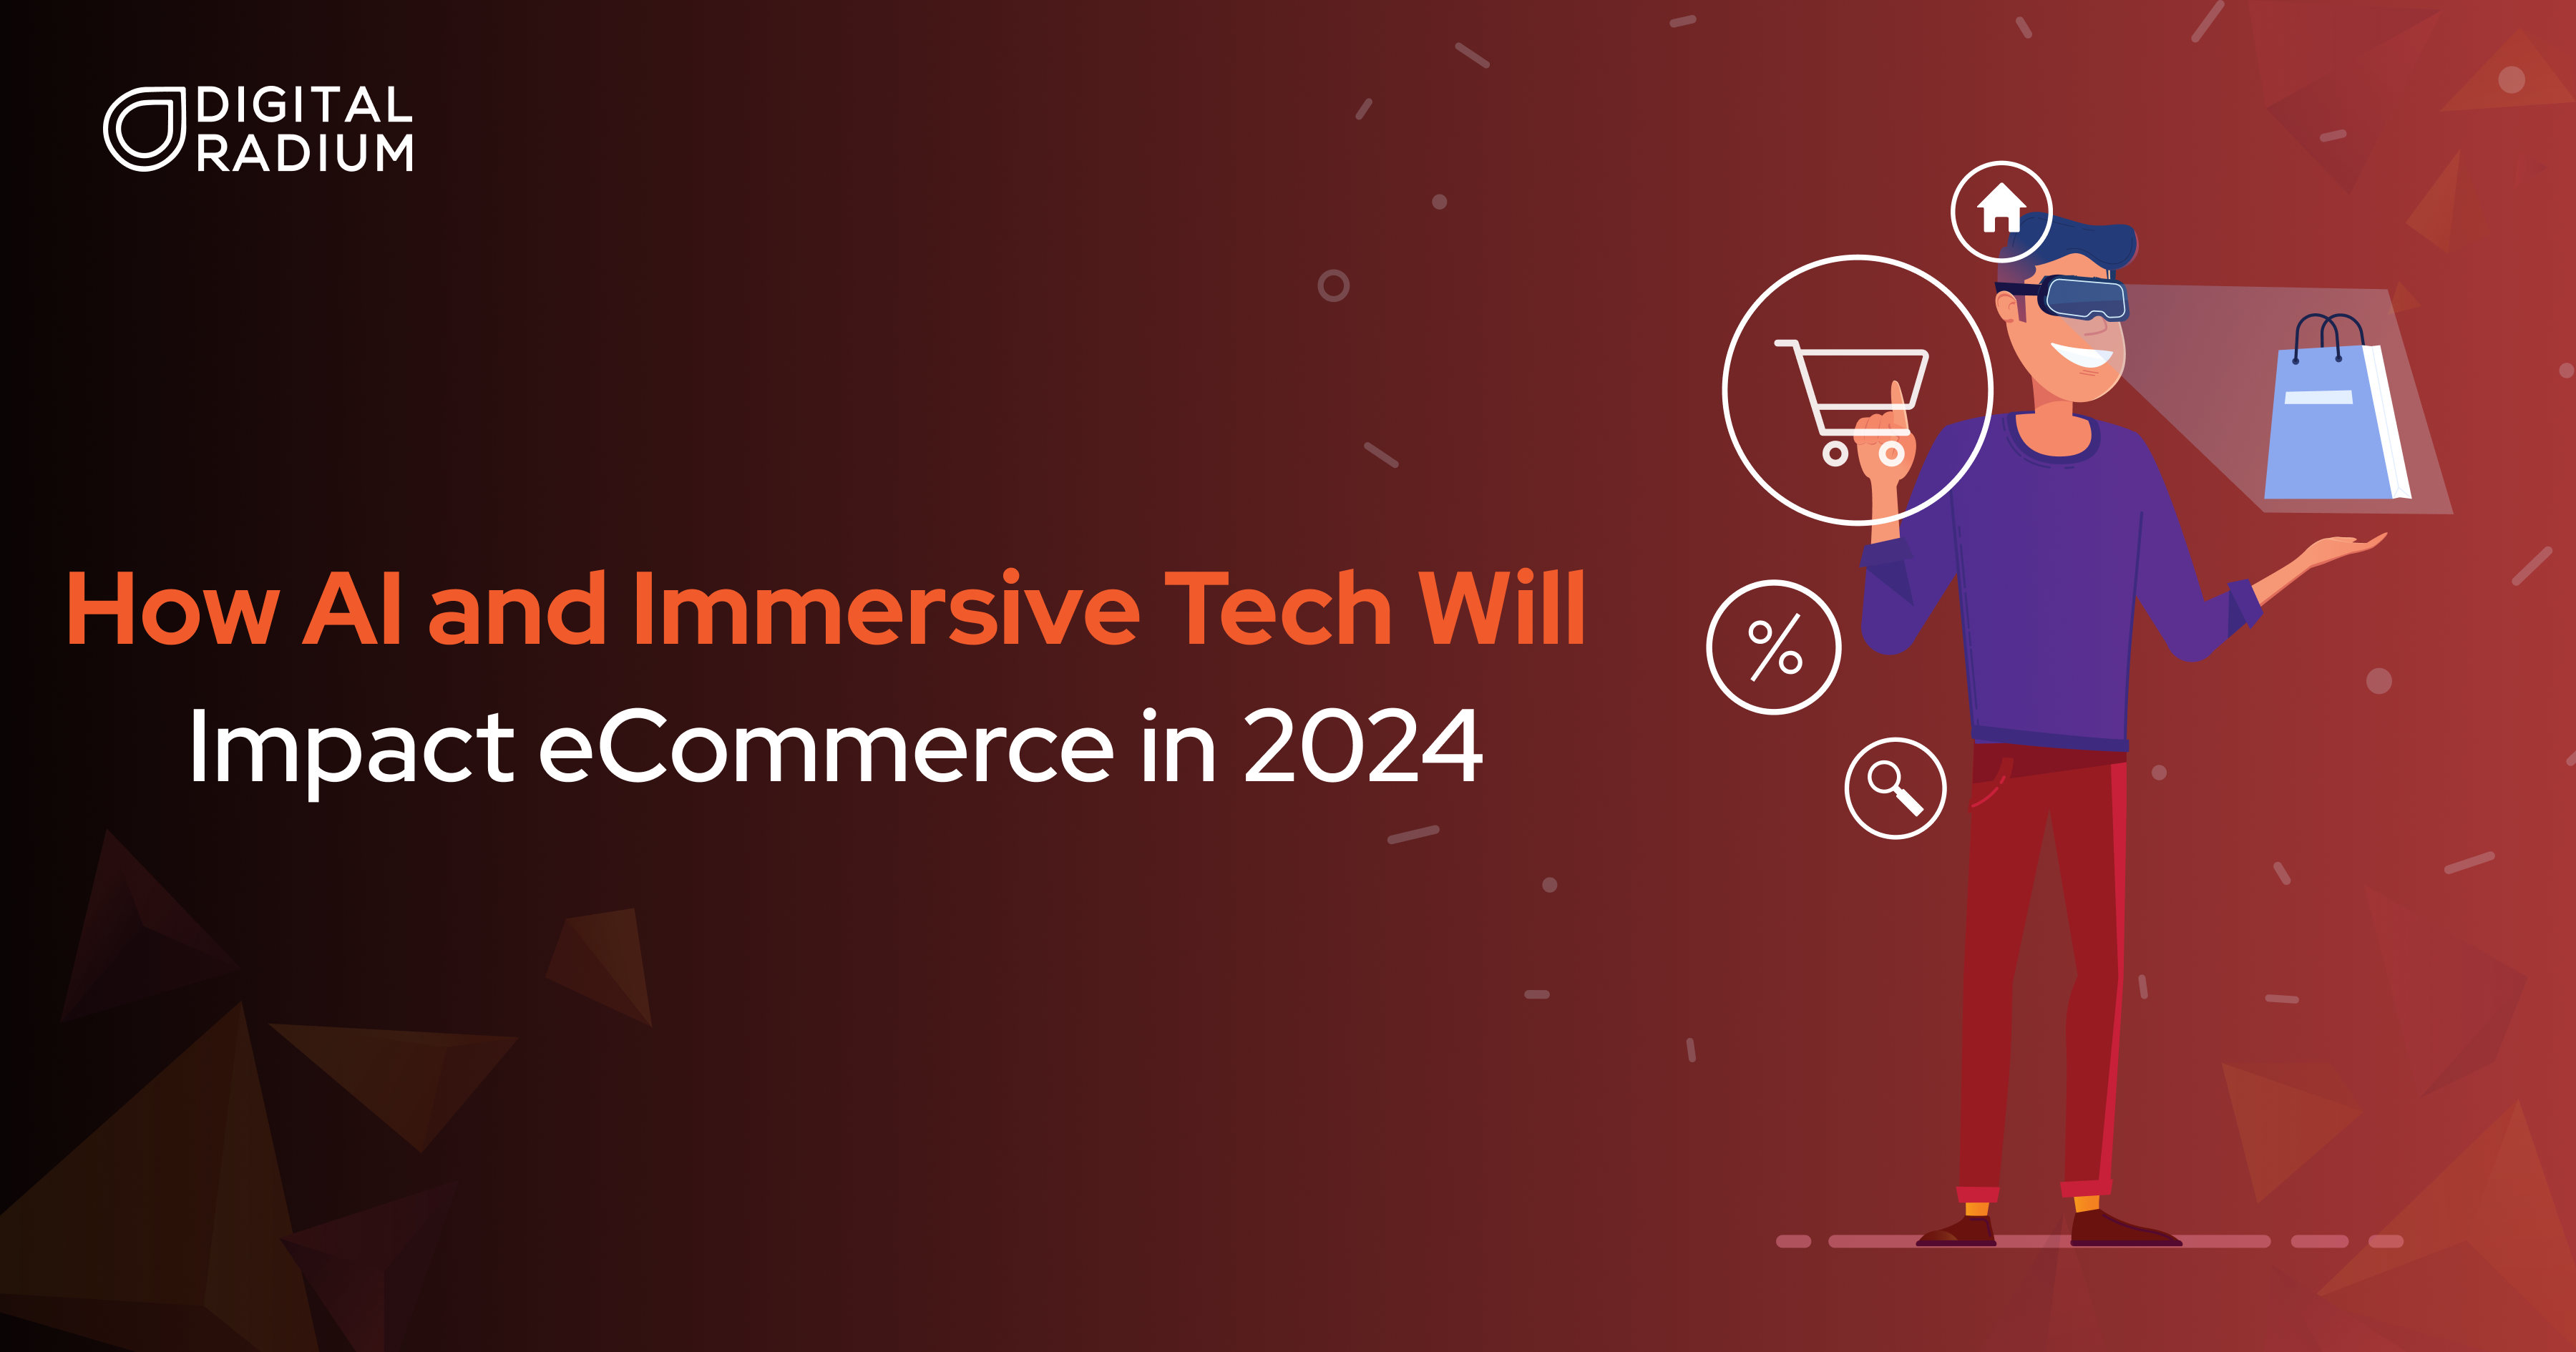 How AI and Immersive Tech Will Impact eCommerce in 2024